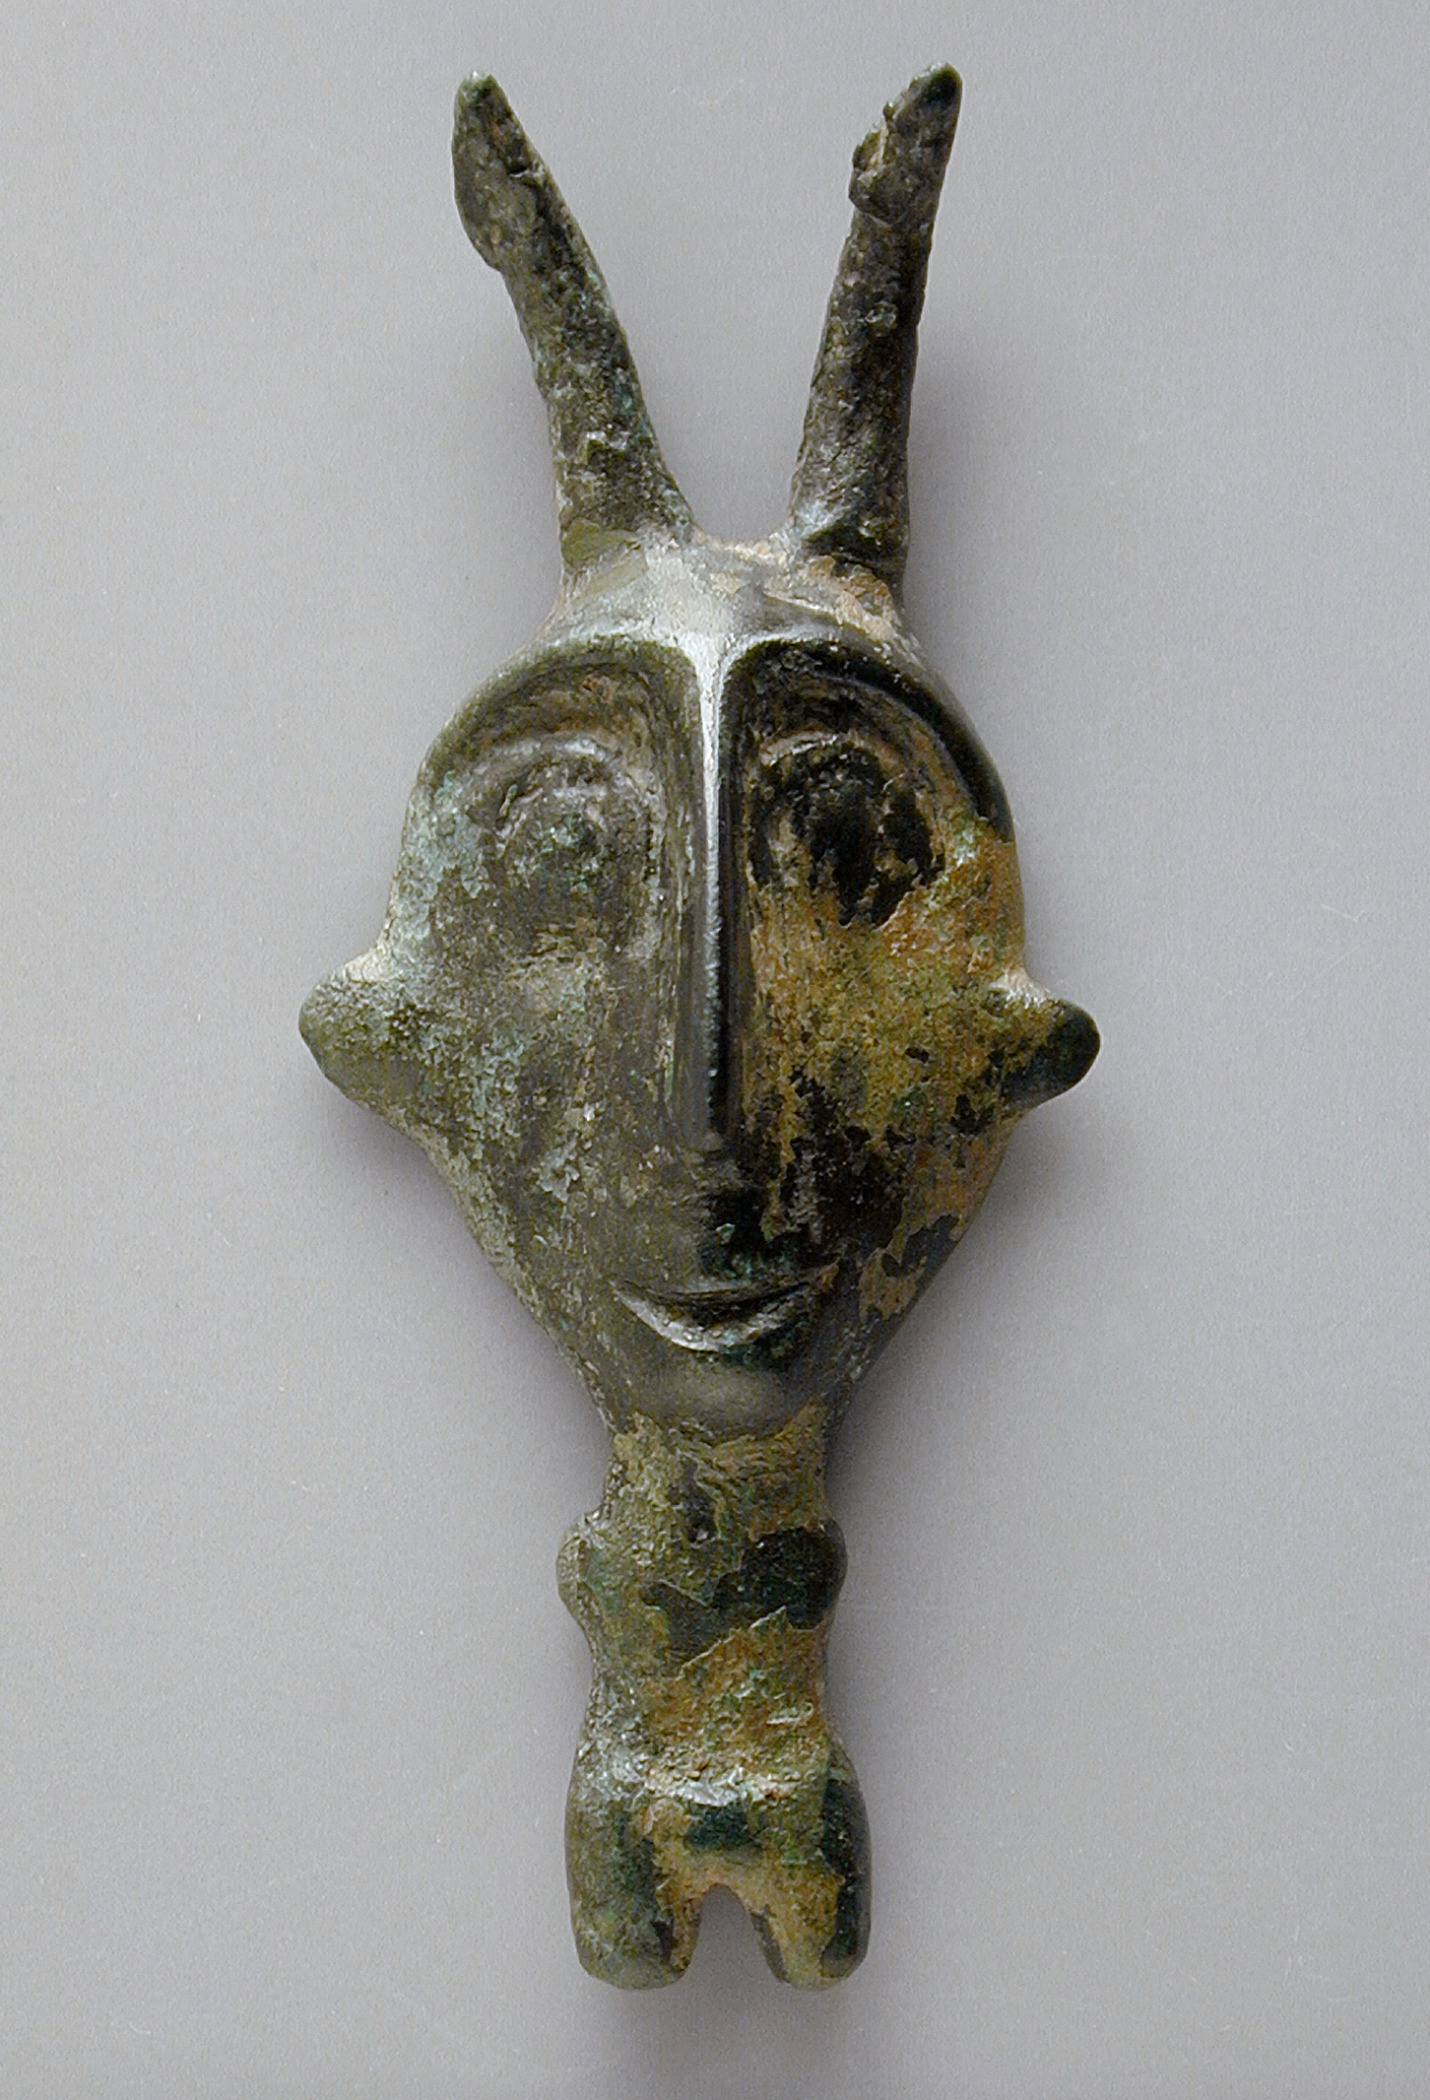 an old and rusty metal mask that has a face